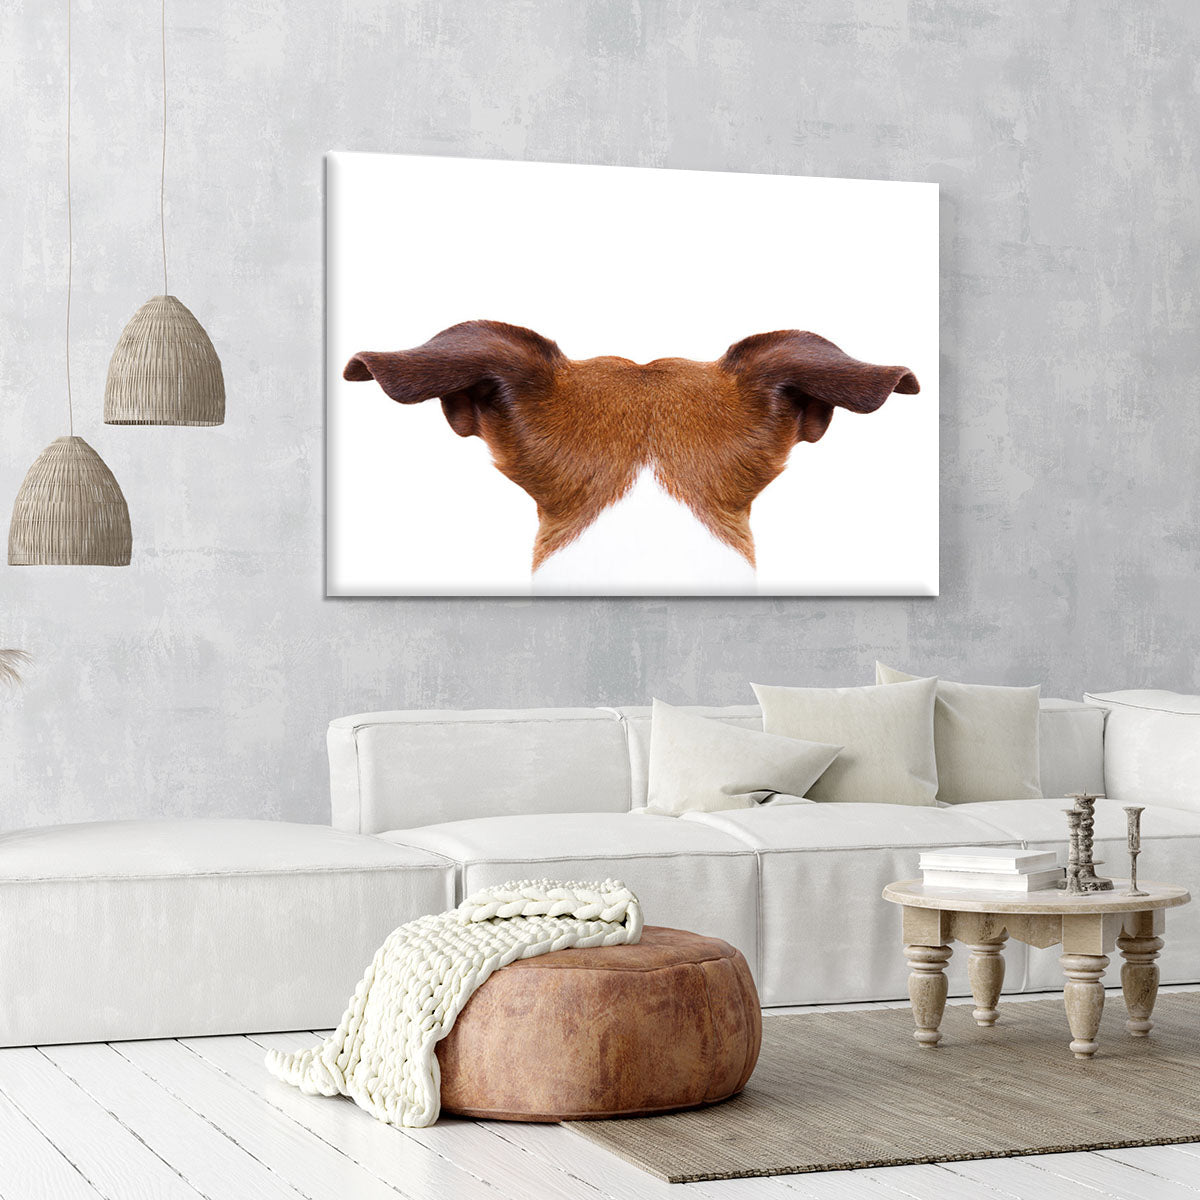 Jack russell dog looking and staring Canvas Print or Poster - Canvas Art Rocks - 6